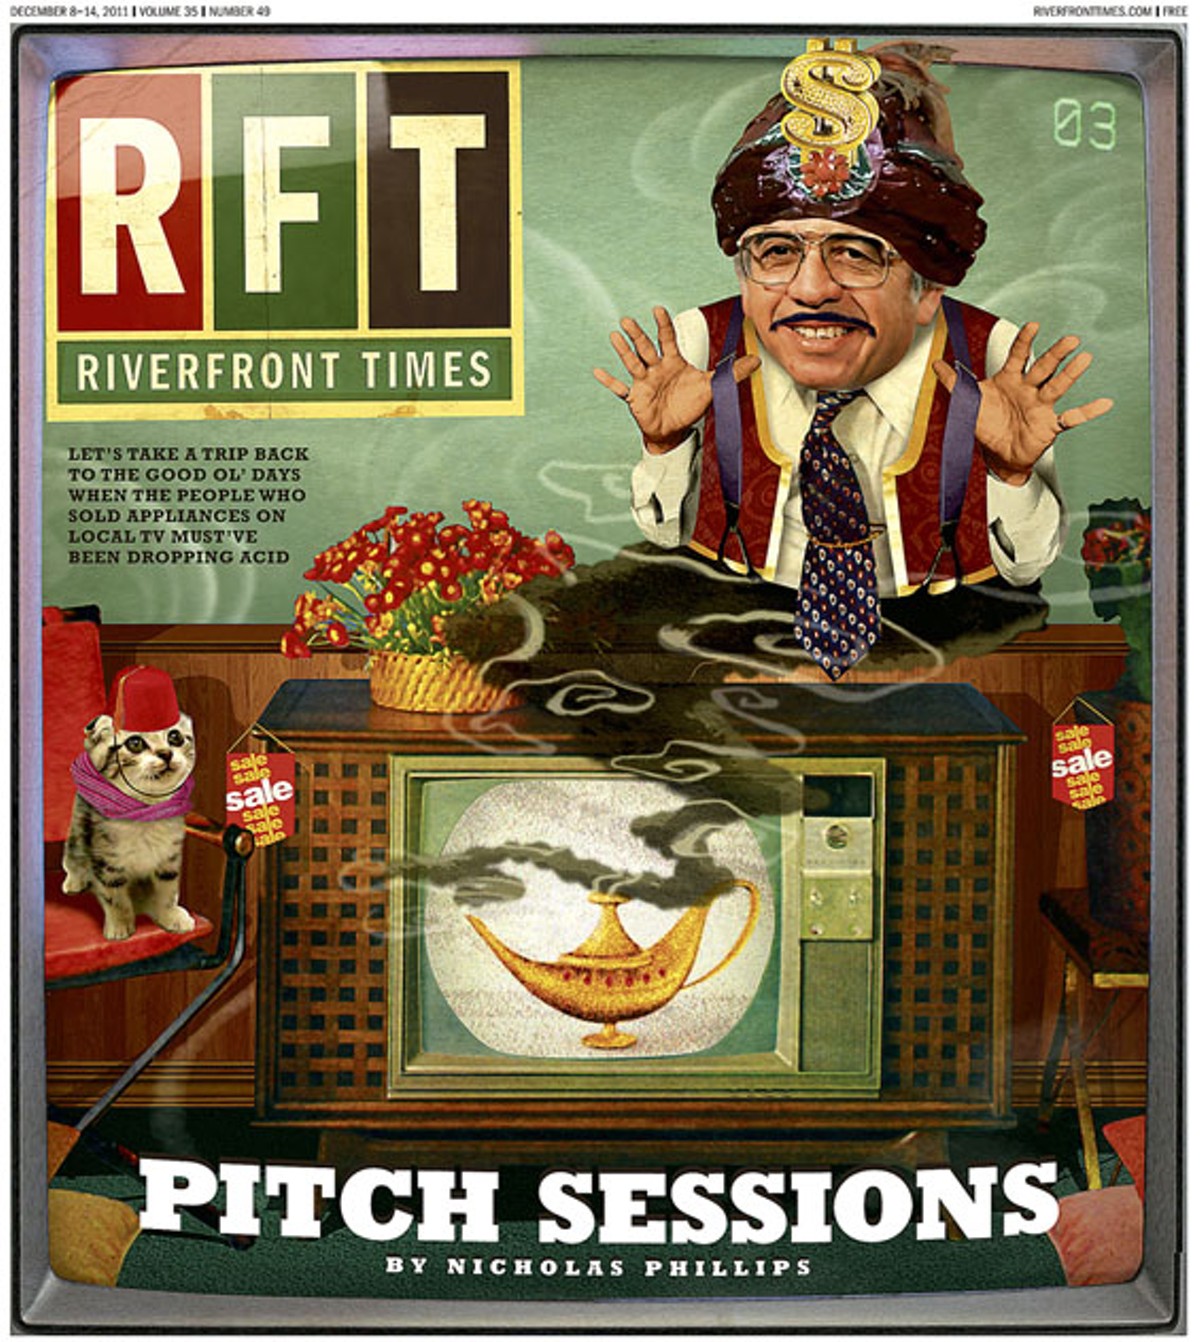 The Cover of the December 8 Print Issue